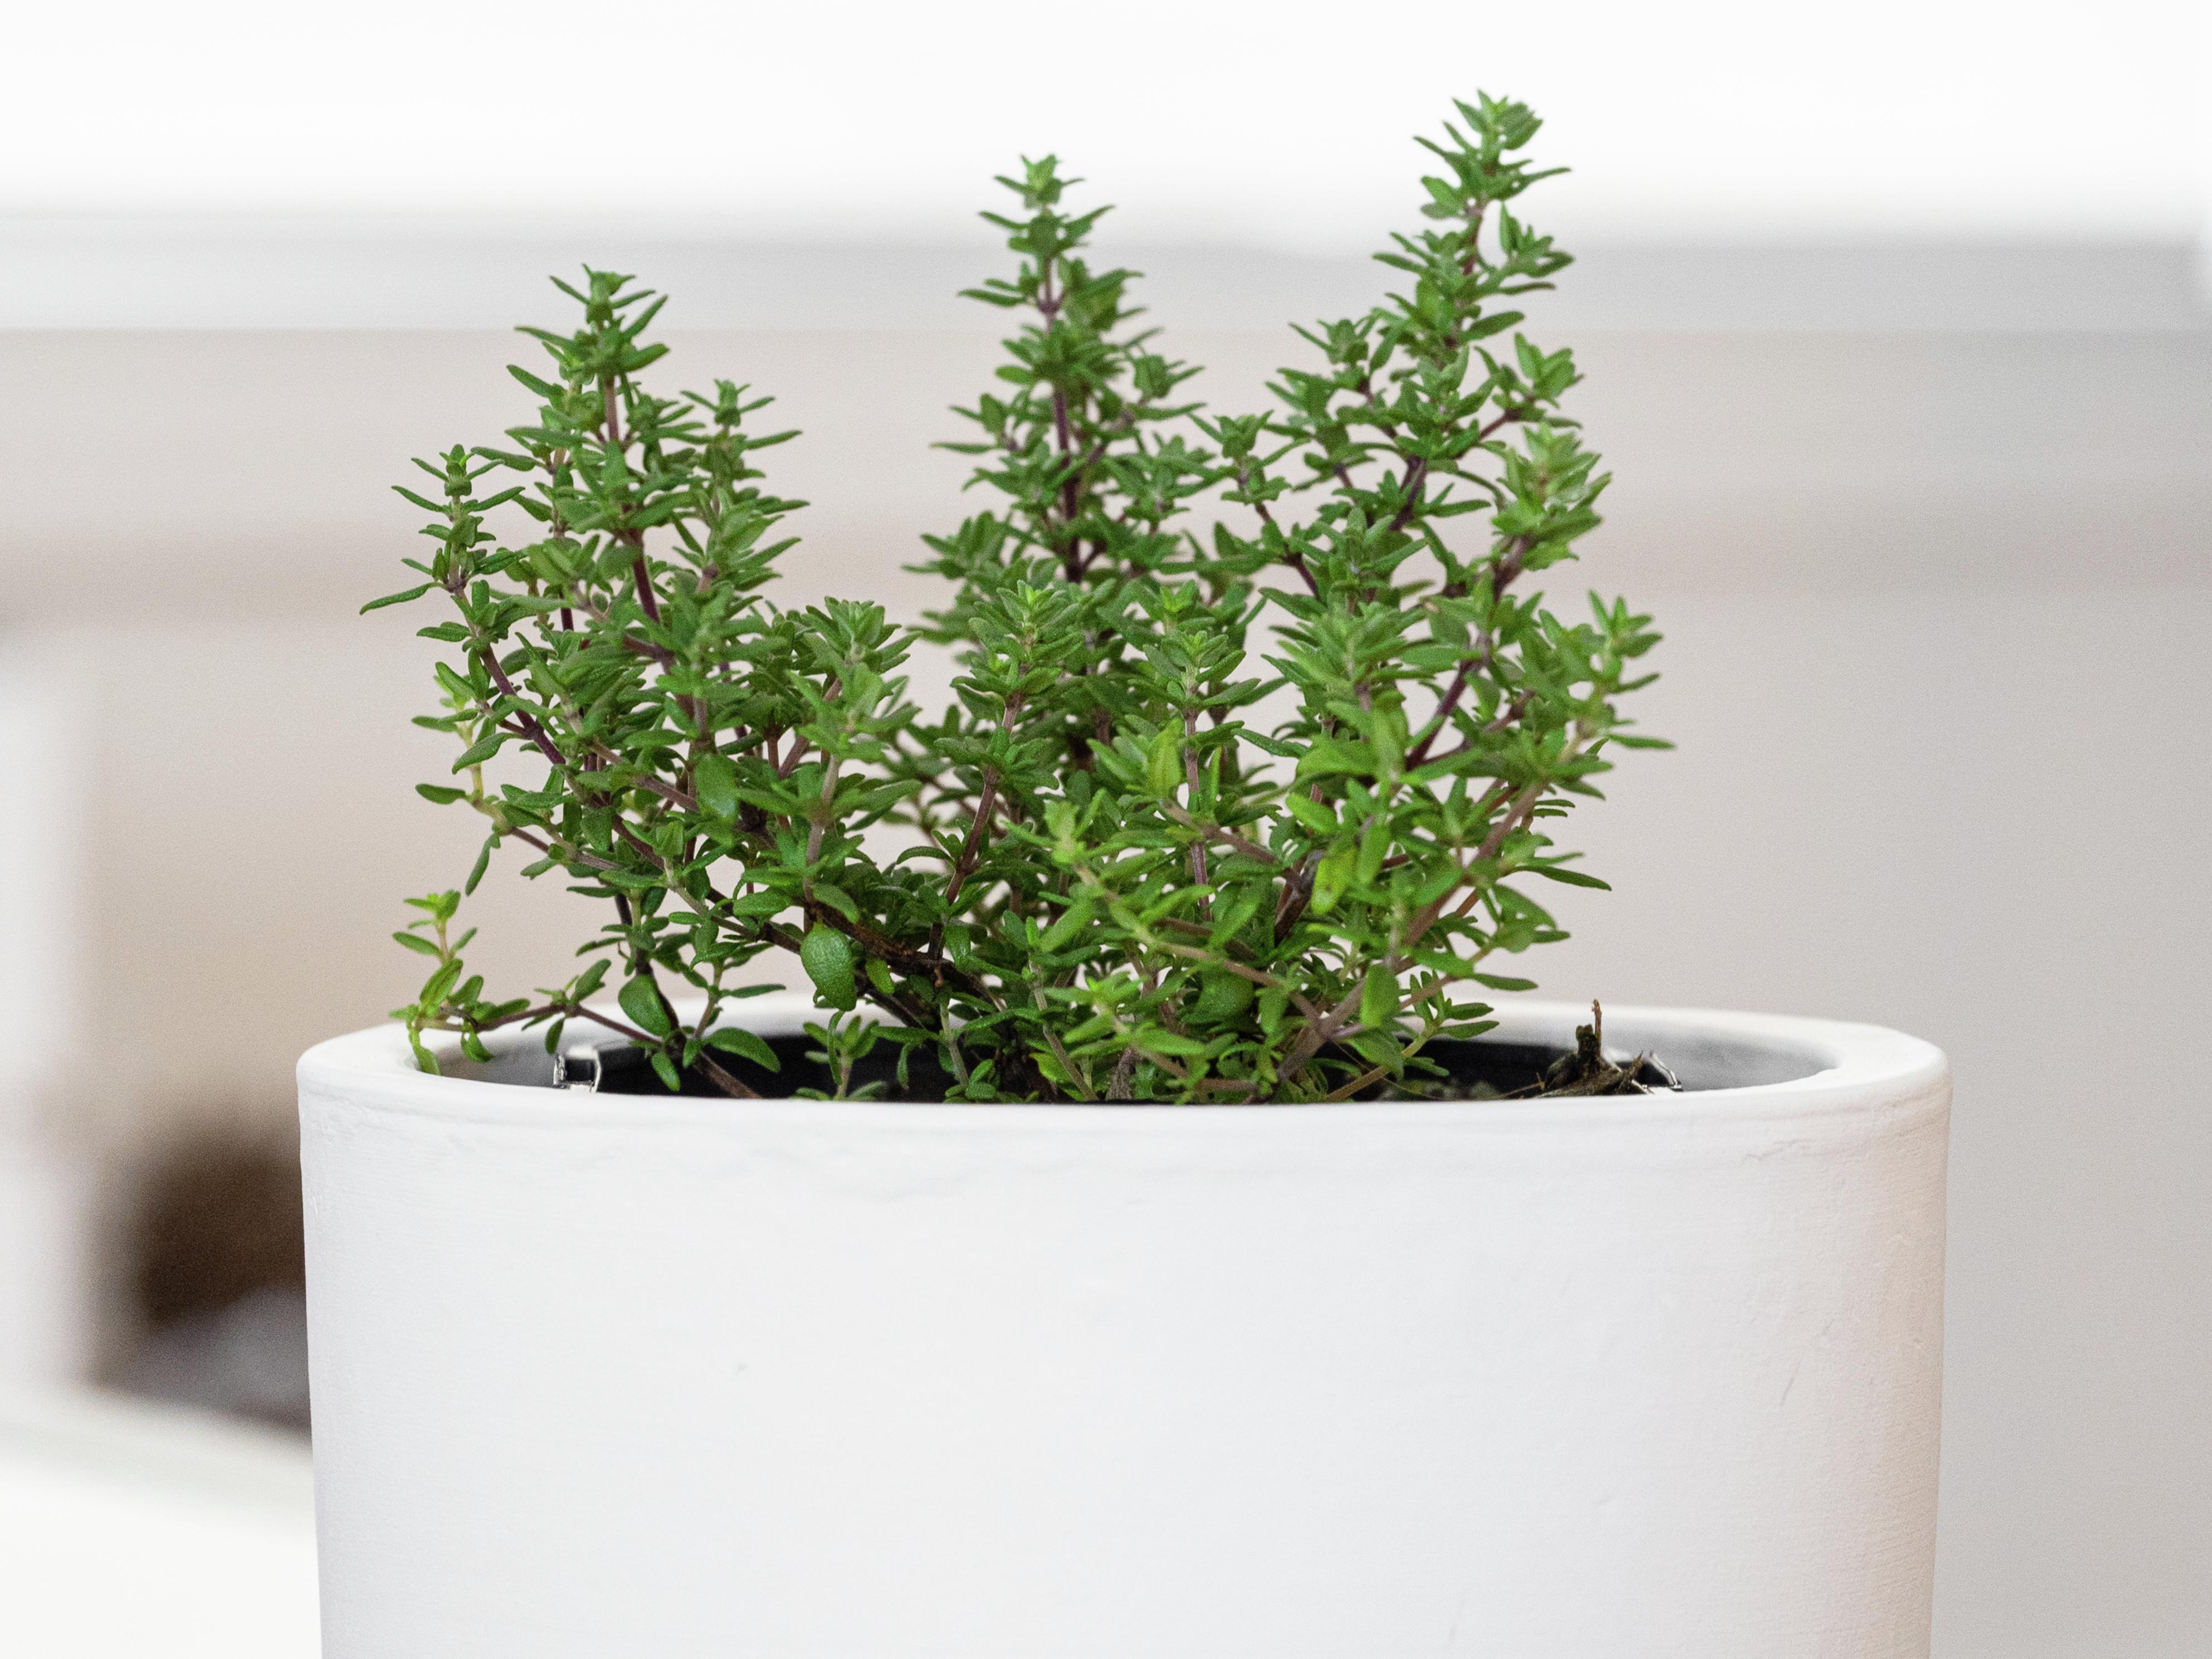 How to Grow Thyme - Growing In The Garden